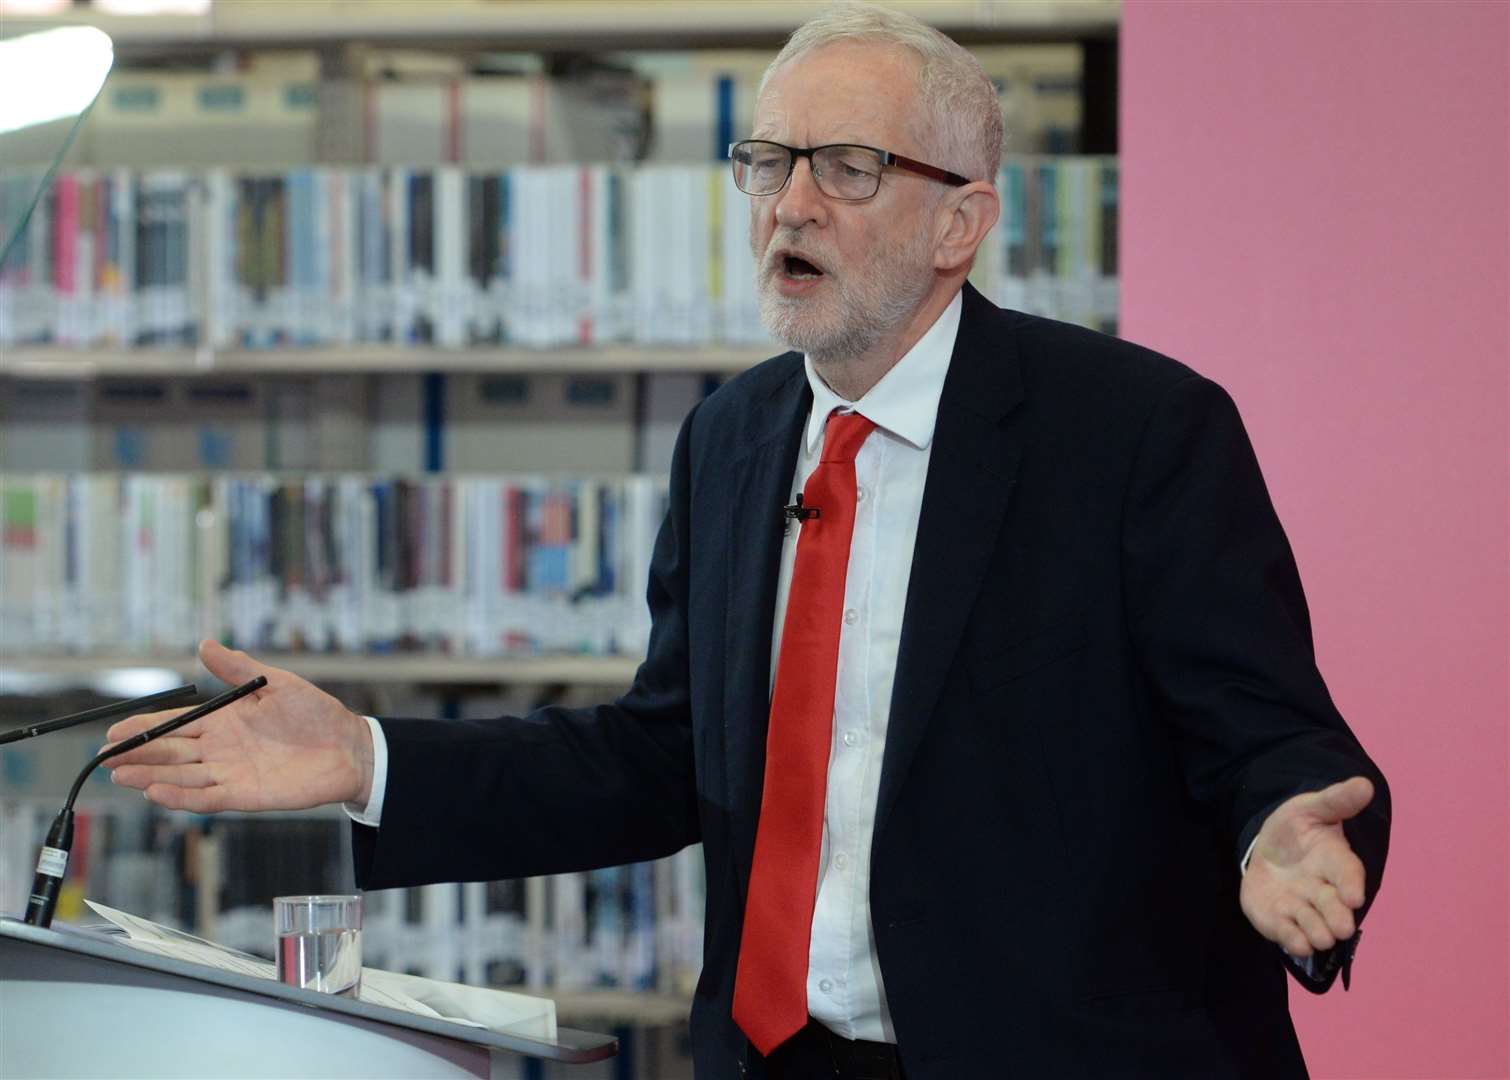 The controversial film is about Jeremy Corbyn. Picture: Chris Davey